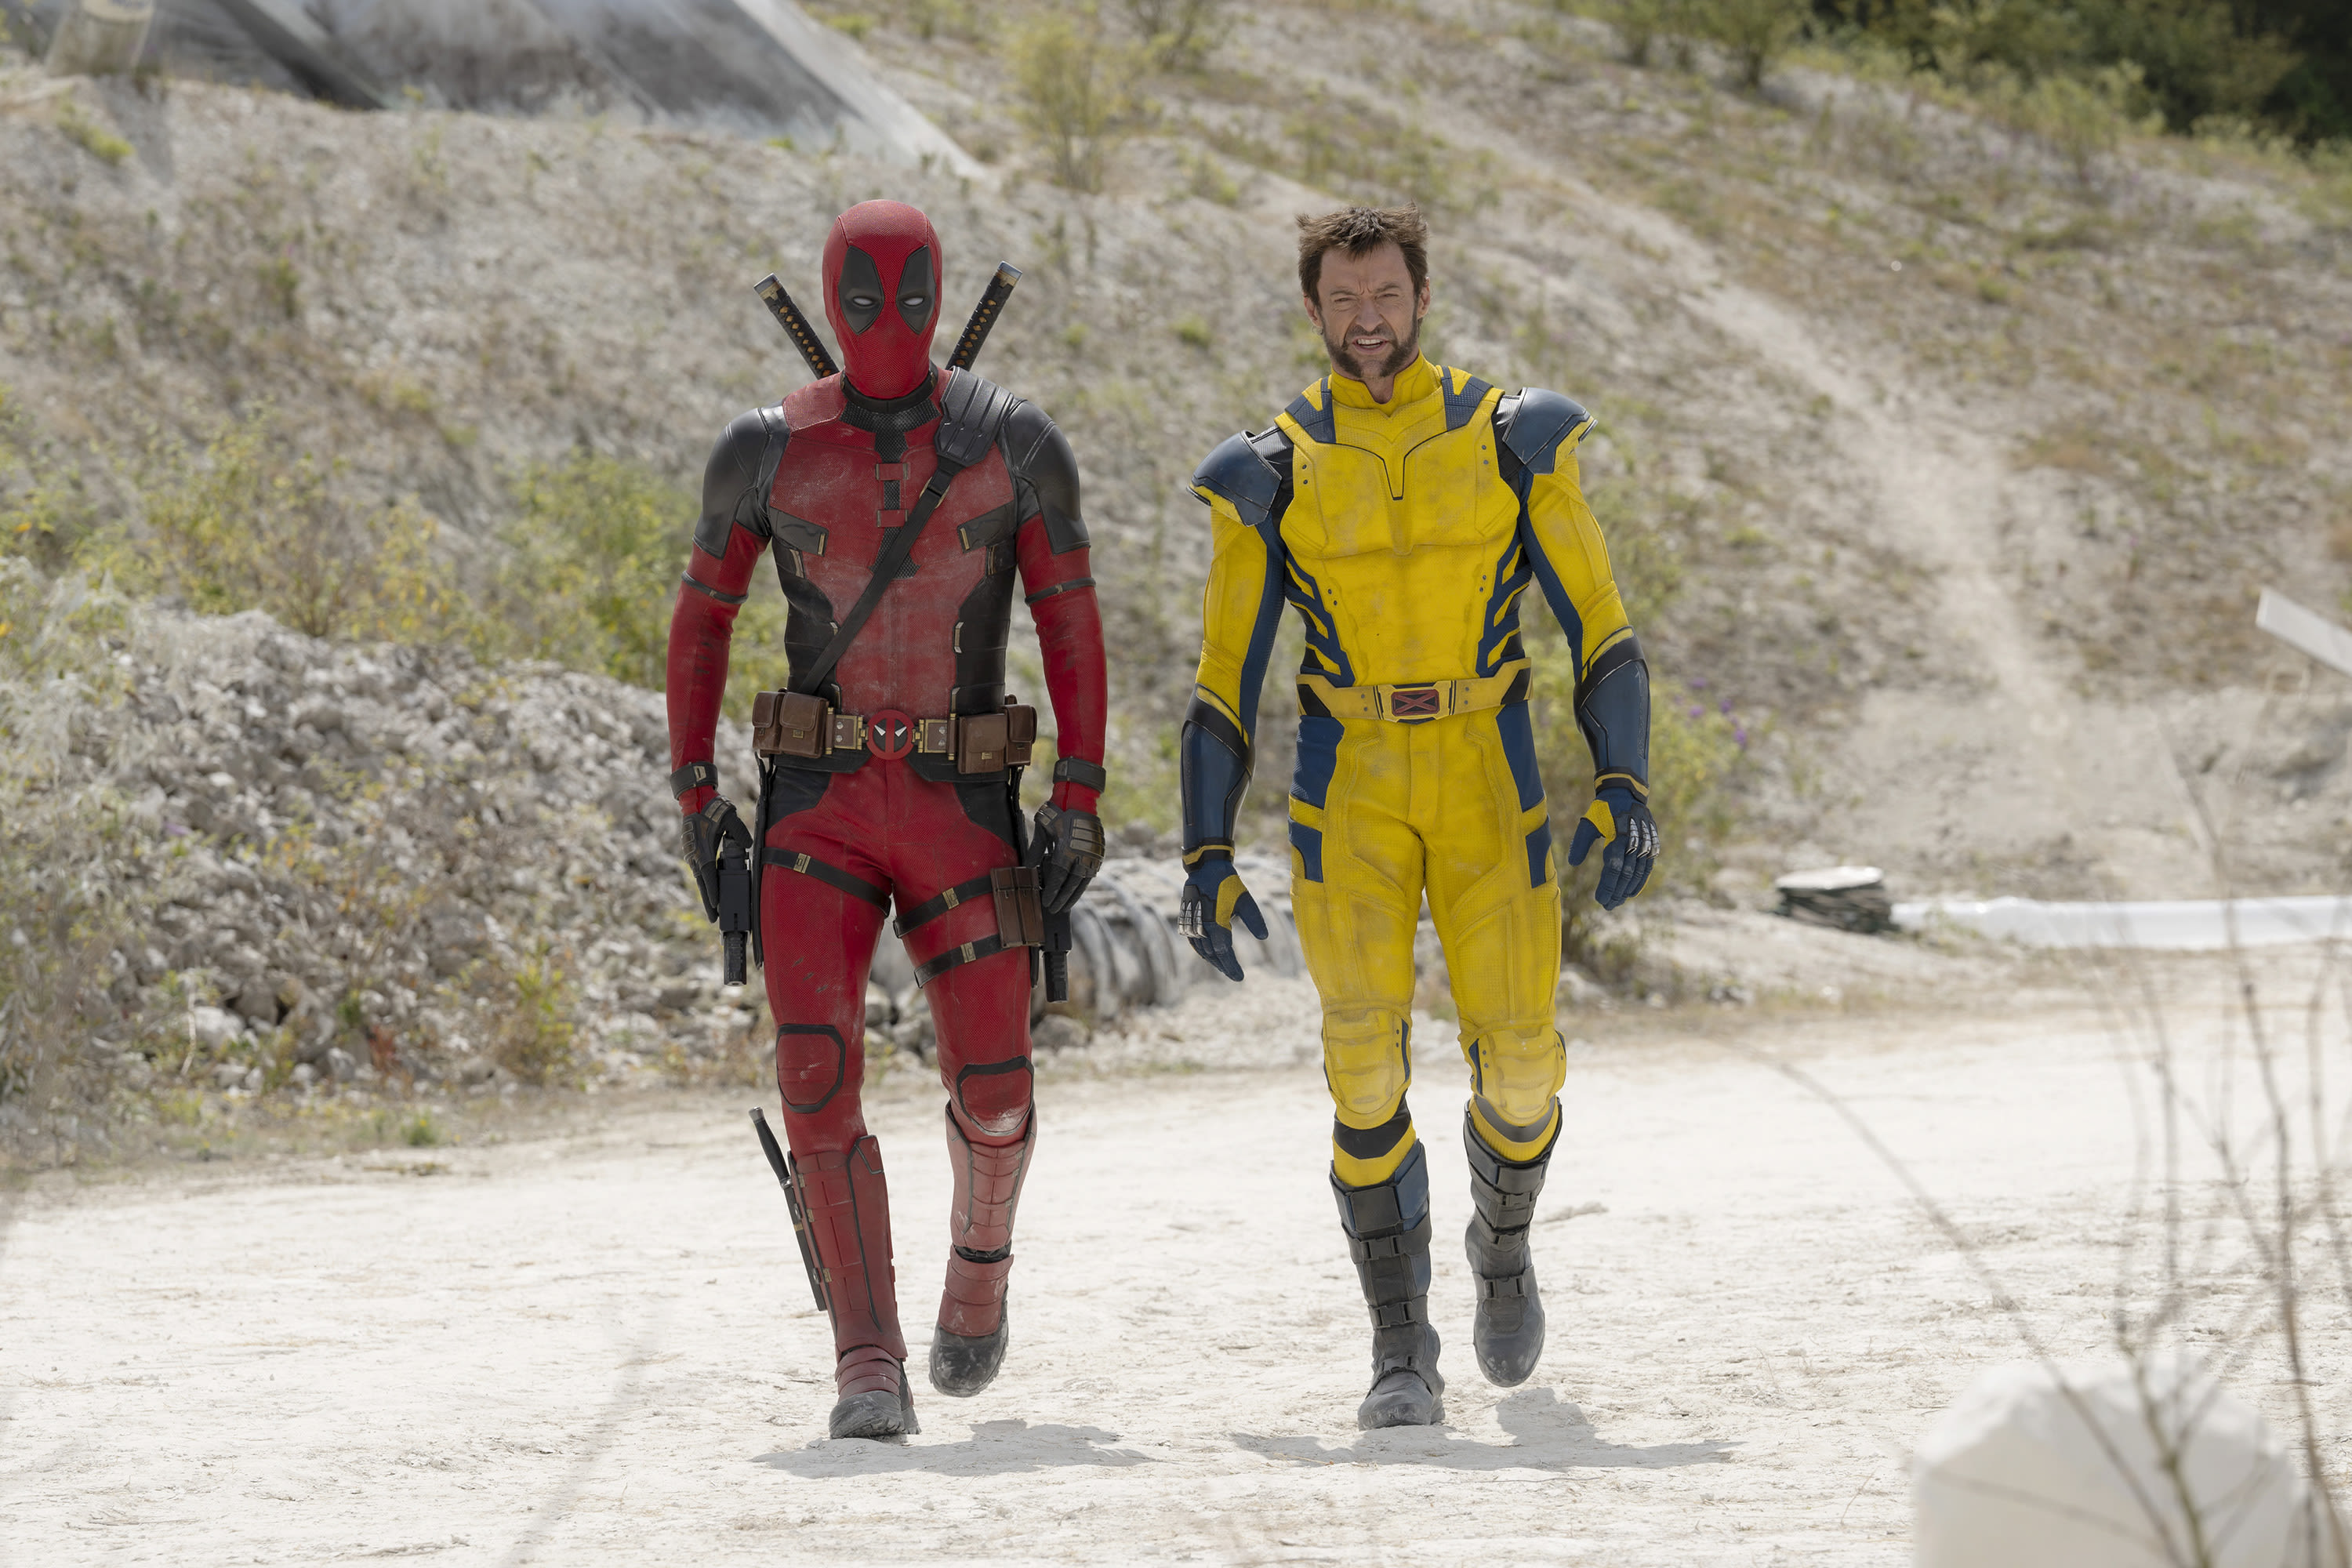 Summer Movie Preview: Blockbuster season brings back Deadpool, Axel Foley and the 'Inside Out' gang